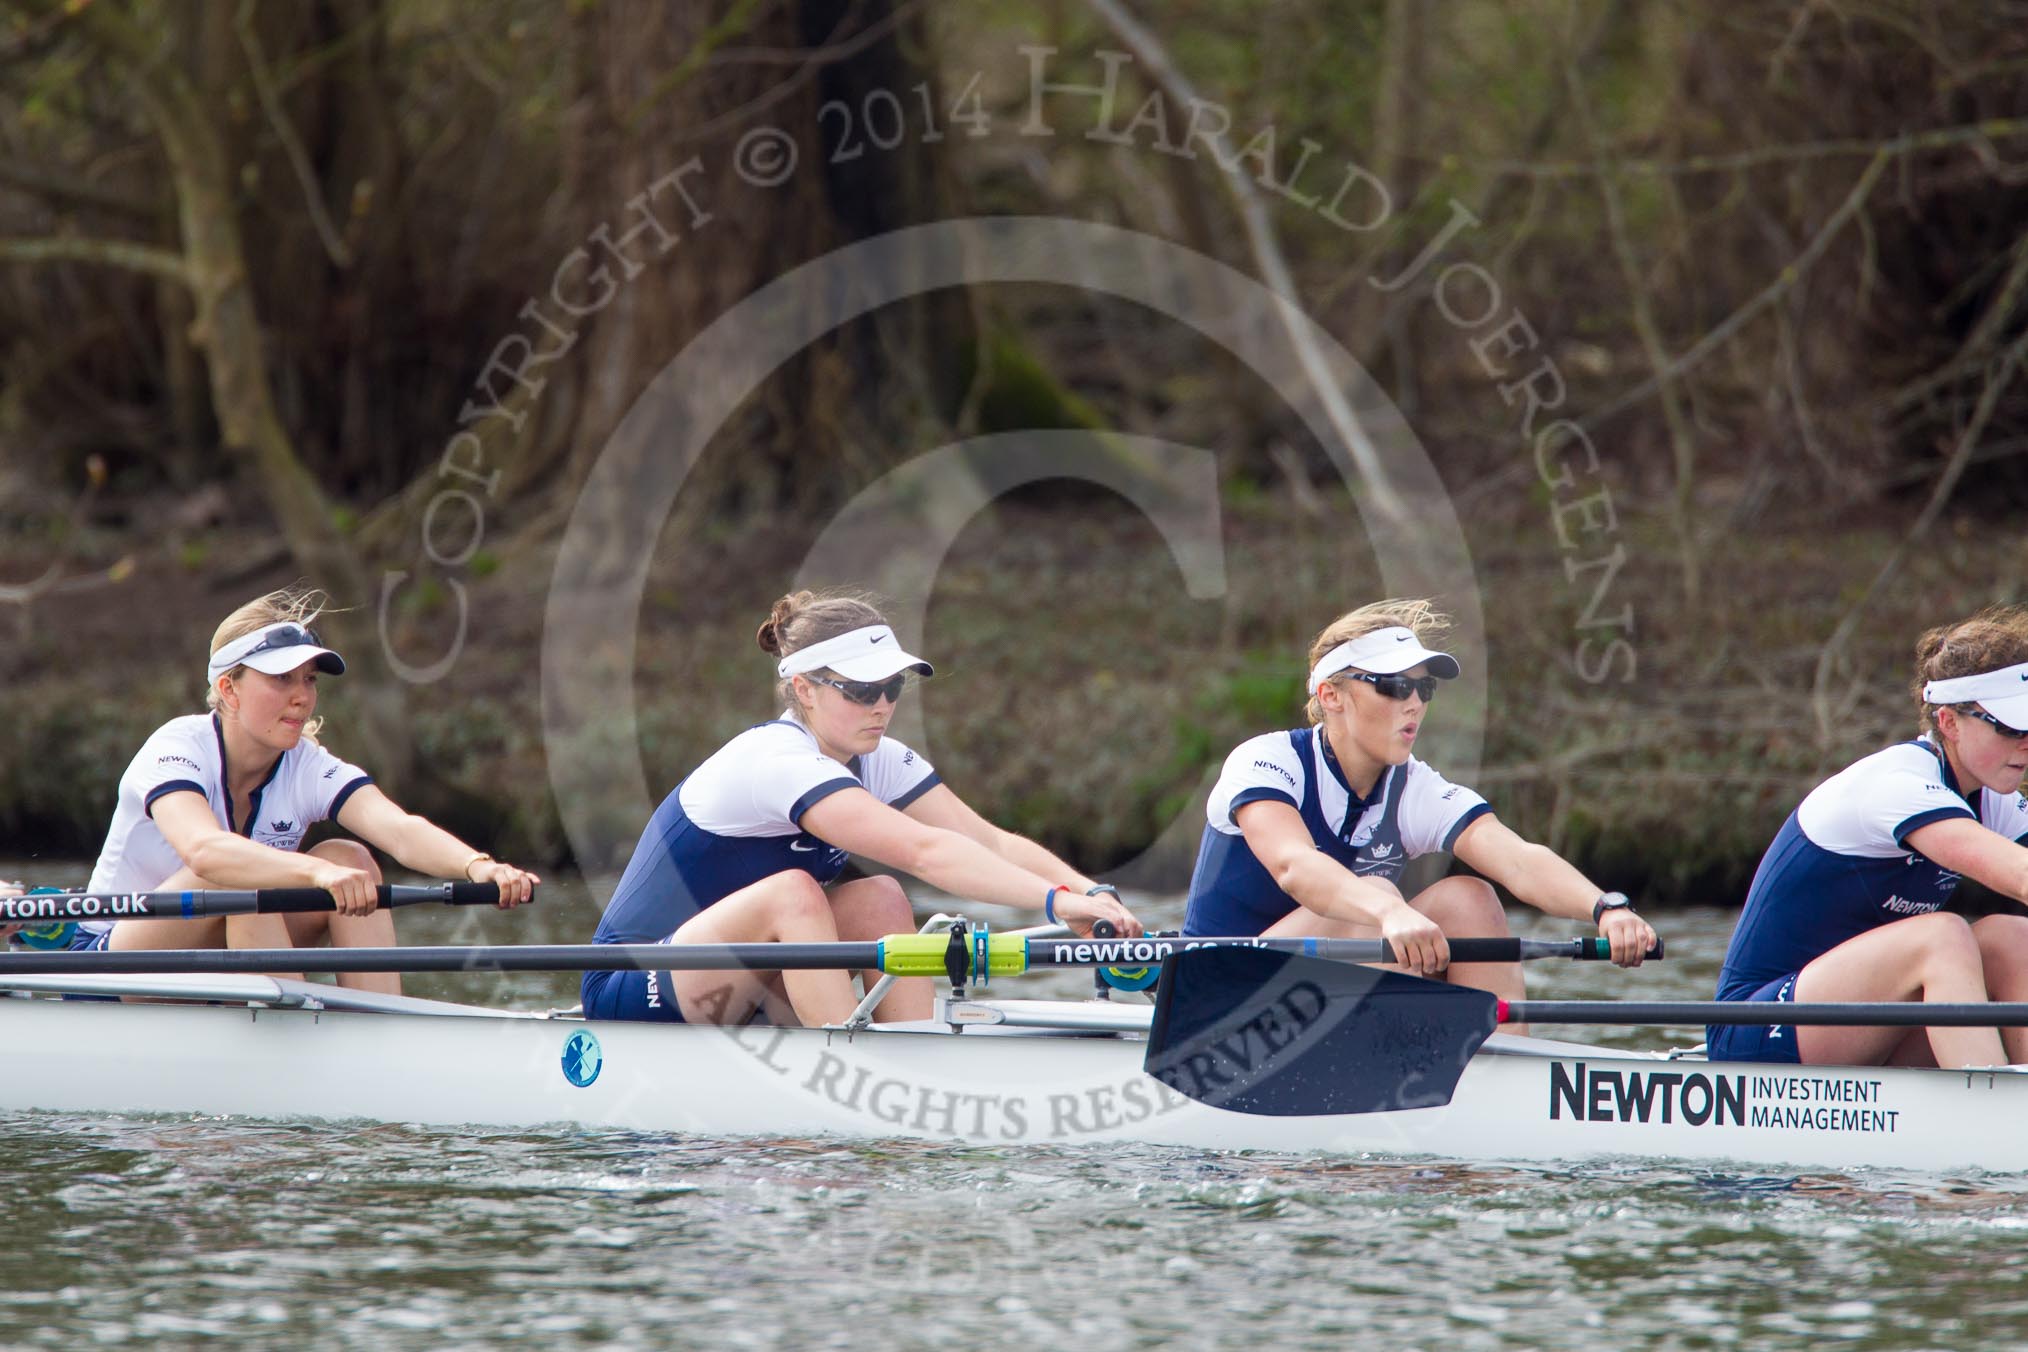 The Women's Boat Race and Henley Boat Races 2014: Before the start of the Women's Boat Race, the Oxford crew is warming up: 3 Maxie Scheske, 4 Lauren Kedar, 5 Nadine Graedel Iberg, 6 Laura Savarese..
River Thames,
Henley-on-Thames,
Buckinghamshire,
United Kingdom,
on 30 March 2014 at 14:24, image #187